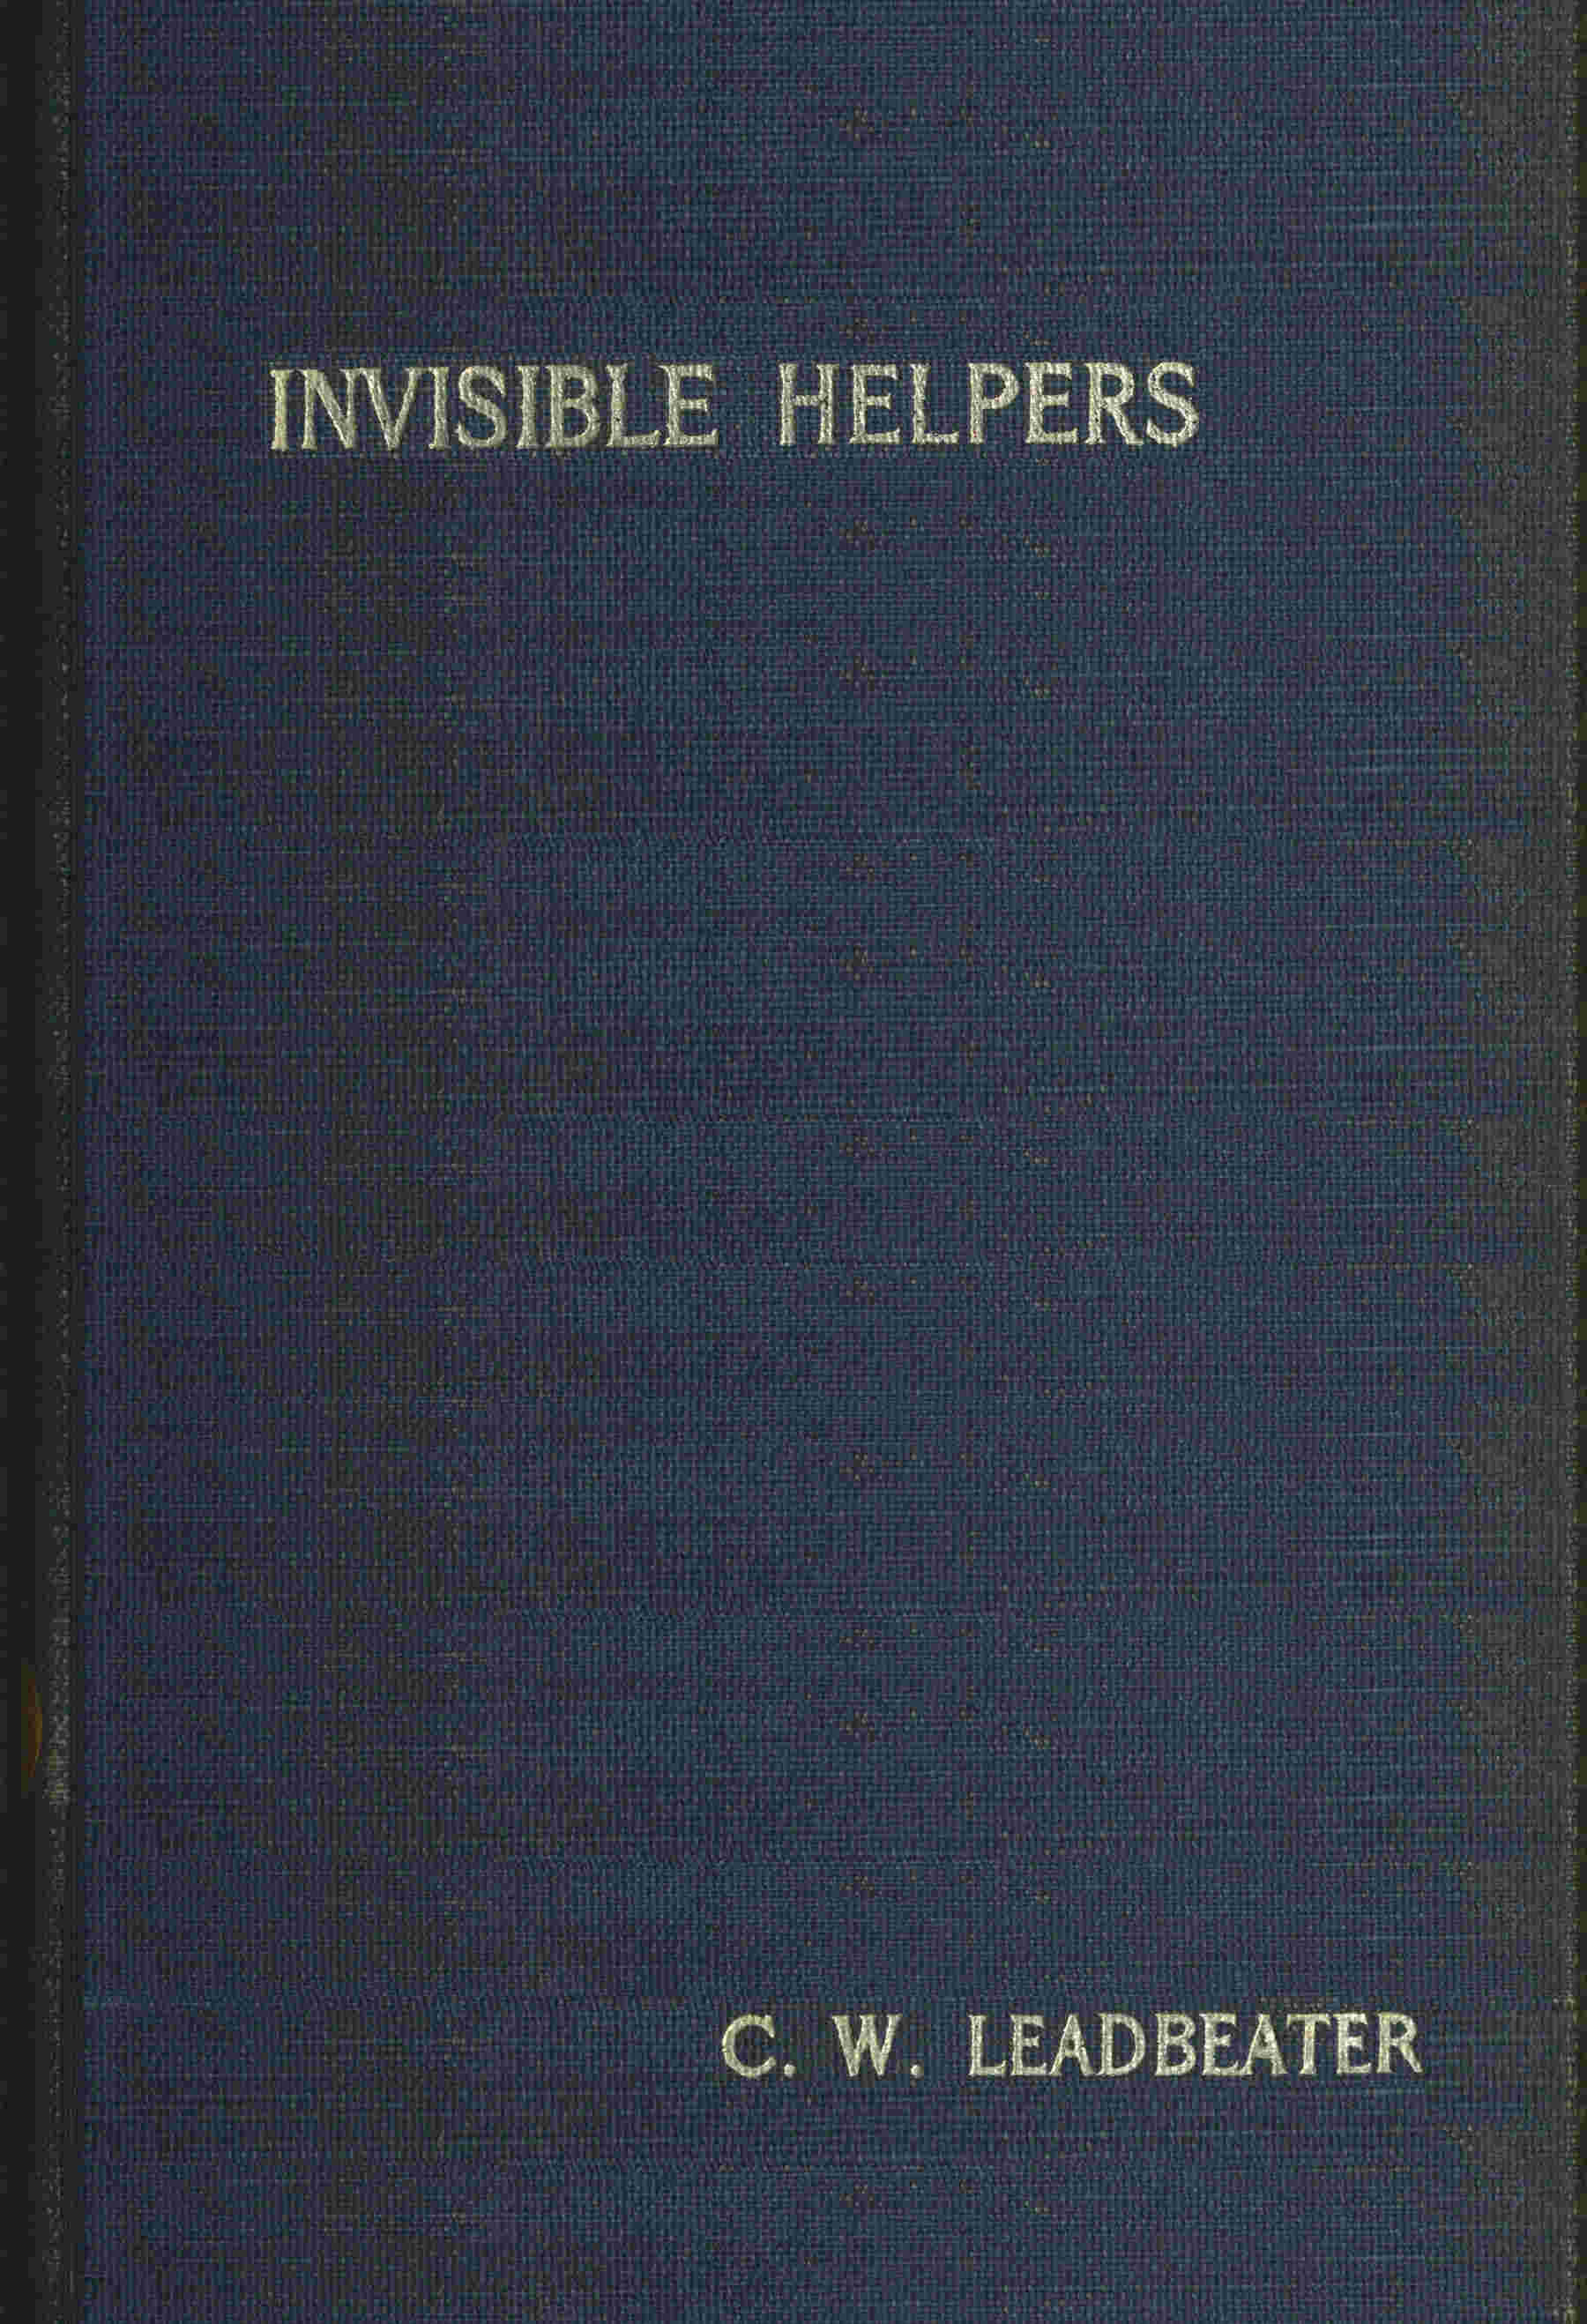 Invisible helpers